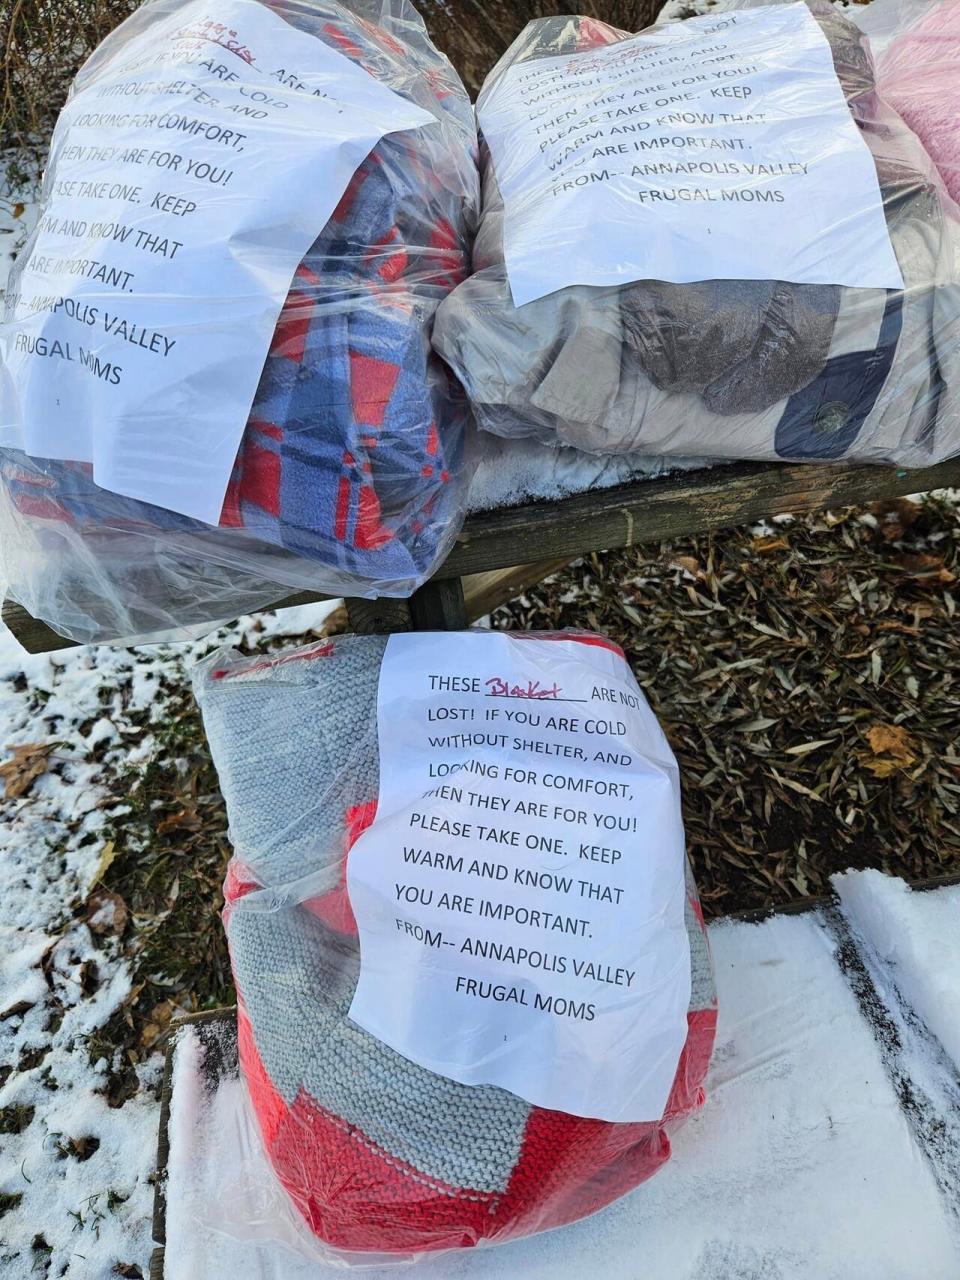 The Annapolis Valley Frugal Moms Society recently started leaving these bags of blankets and winter clothes in outdoor public spaces in the Annapolis Valley.